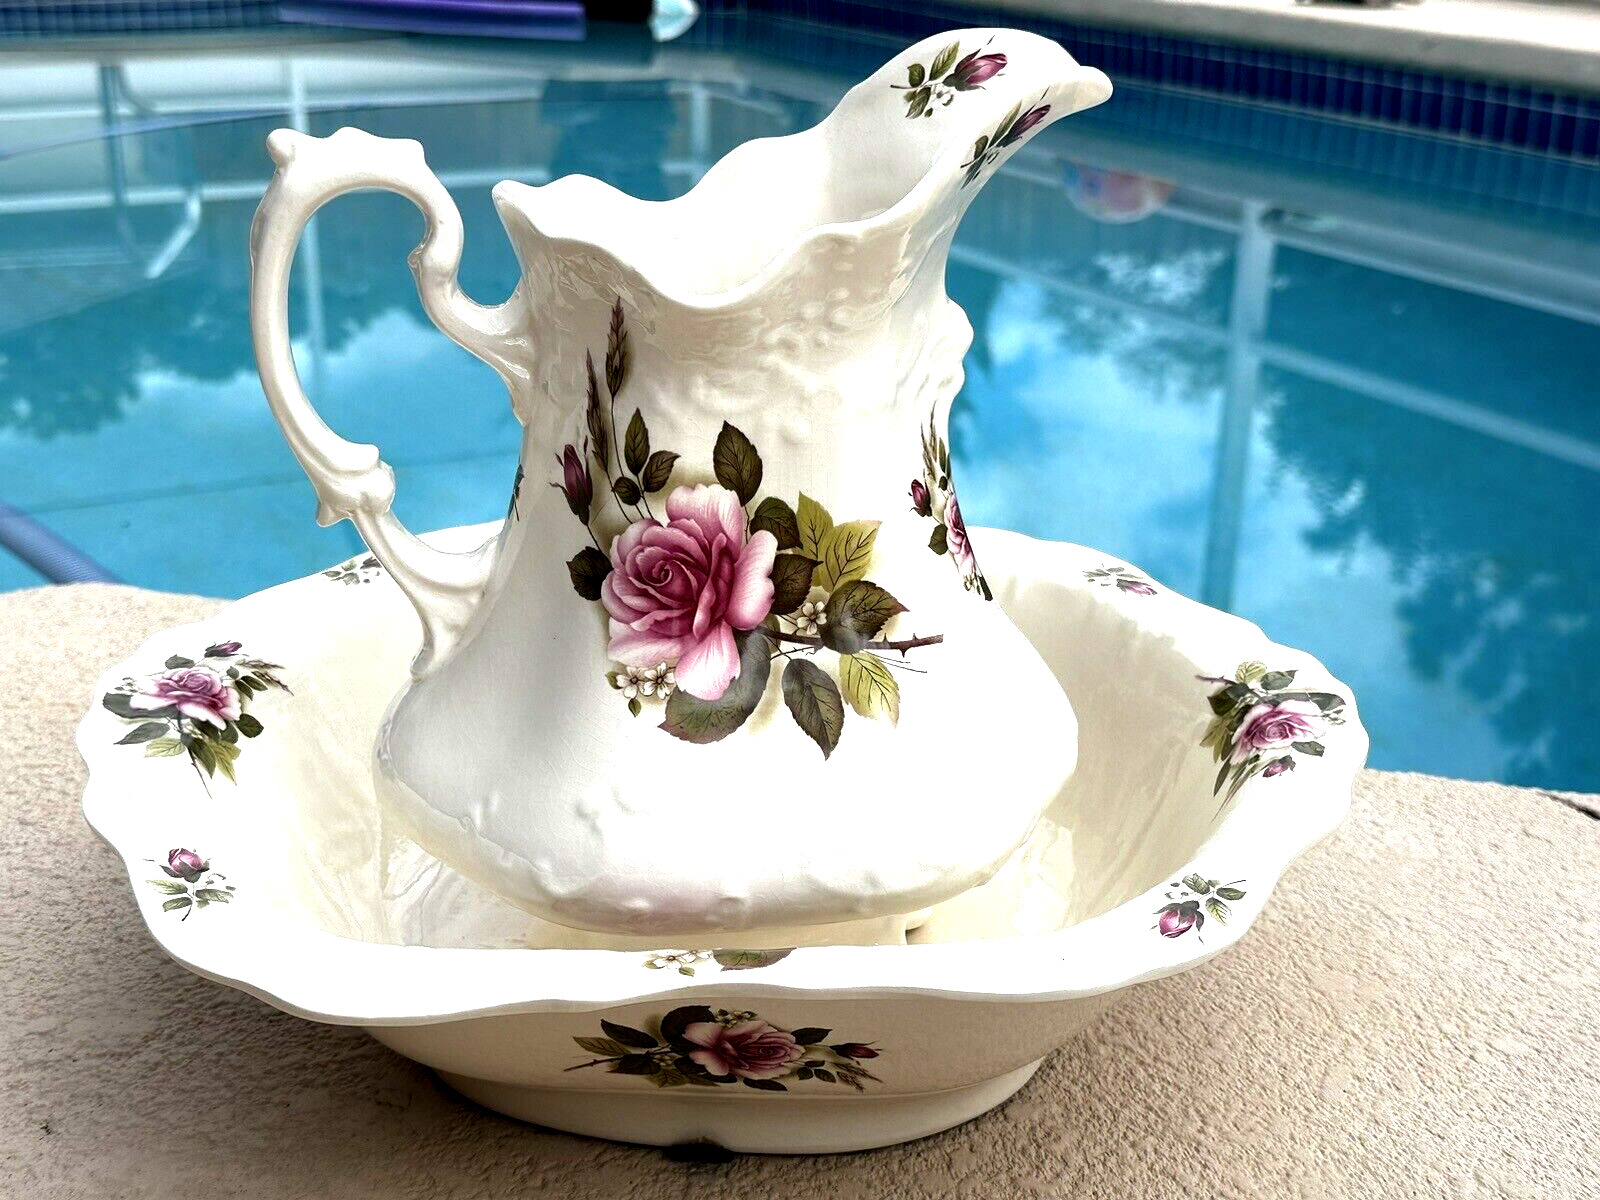 Vintage Pitcher and Basin Bowl set Rose Design Made in England Great Condition